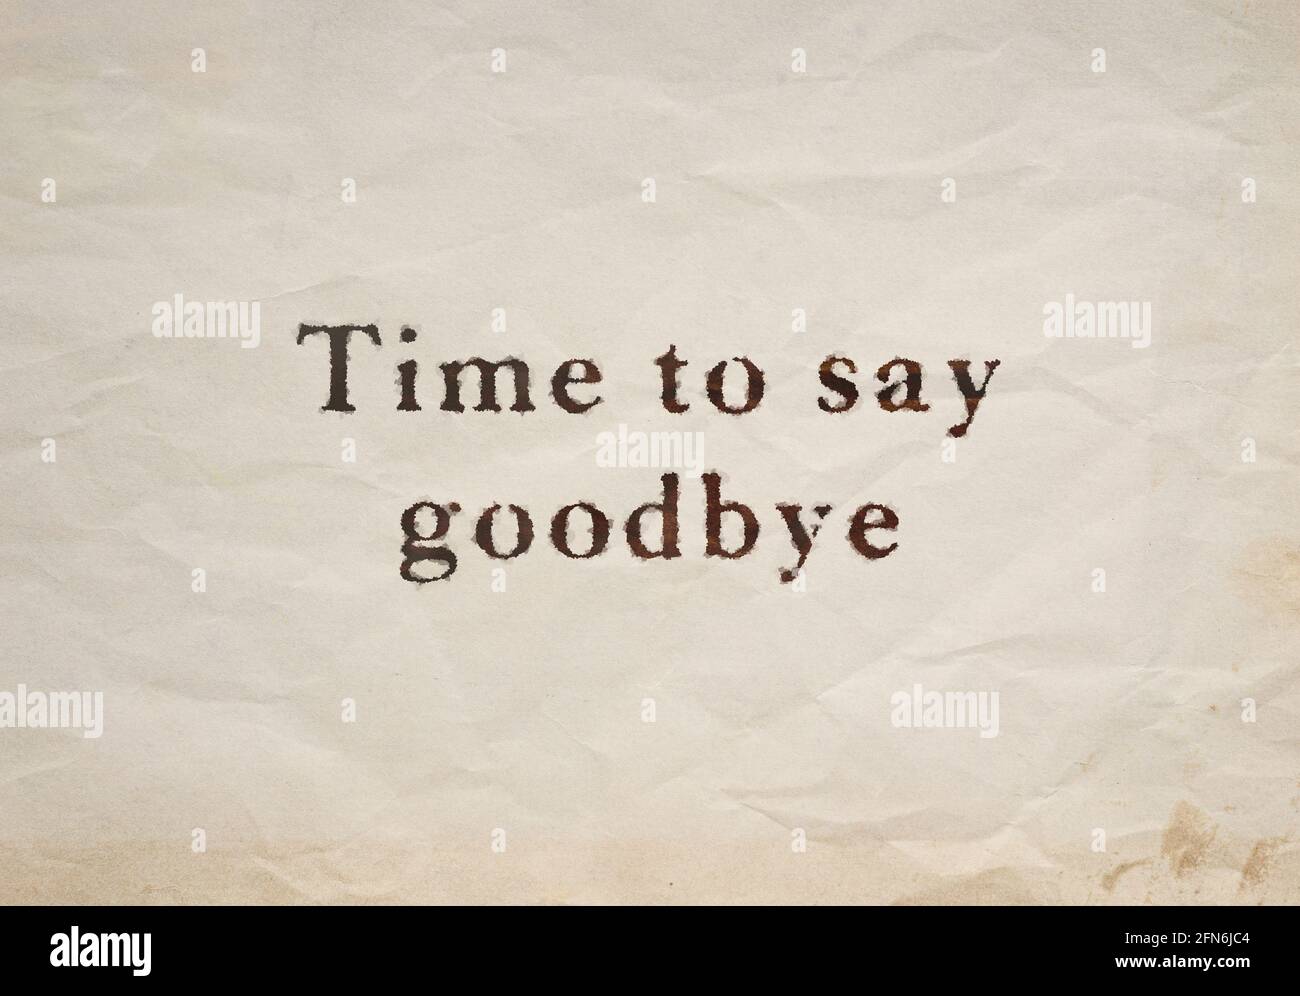 Close-up of 'Time to say goodbye' text on an old, stained and crumpled beige paper. Stock Photo